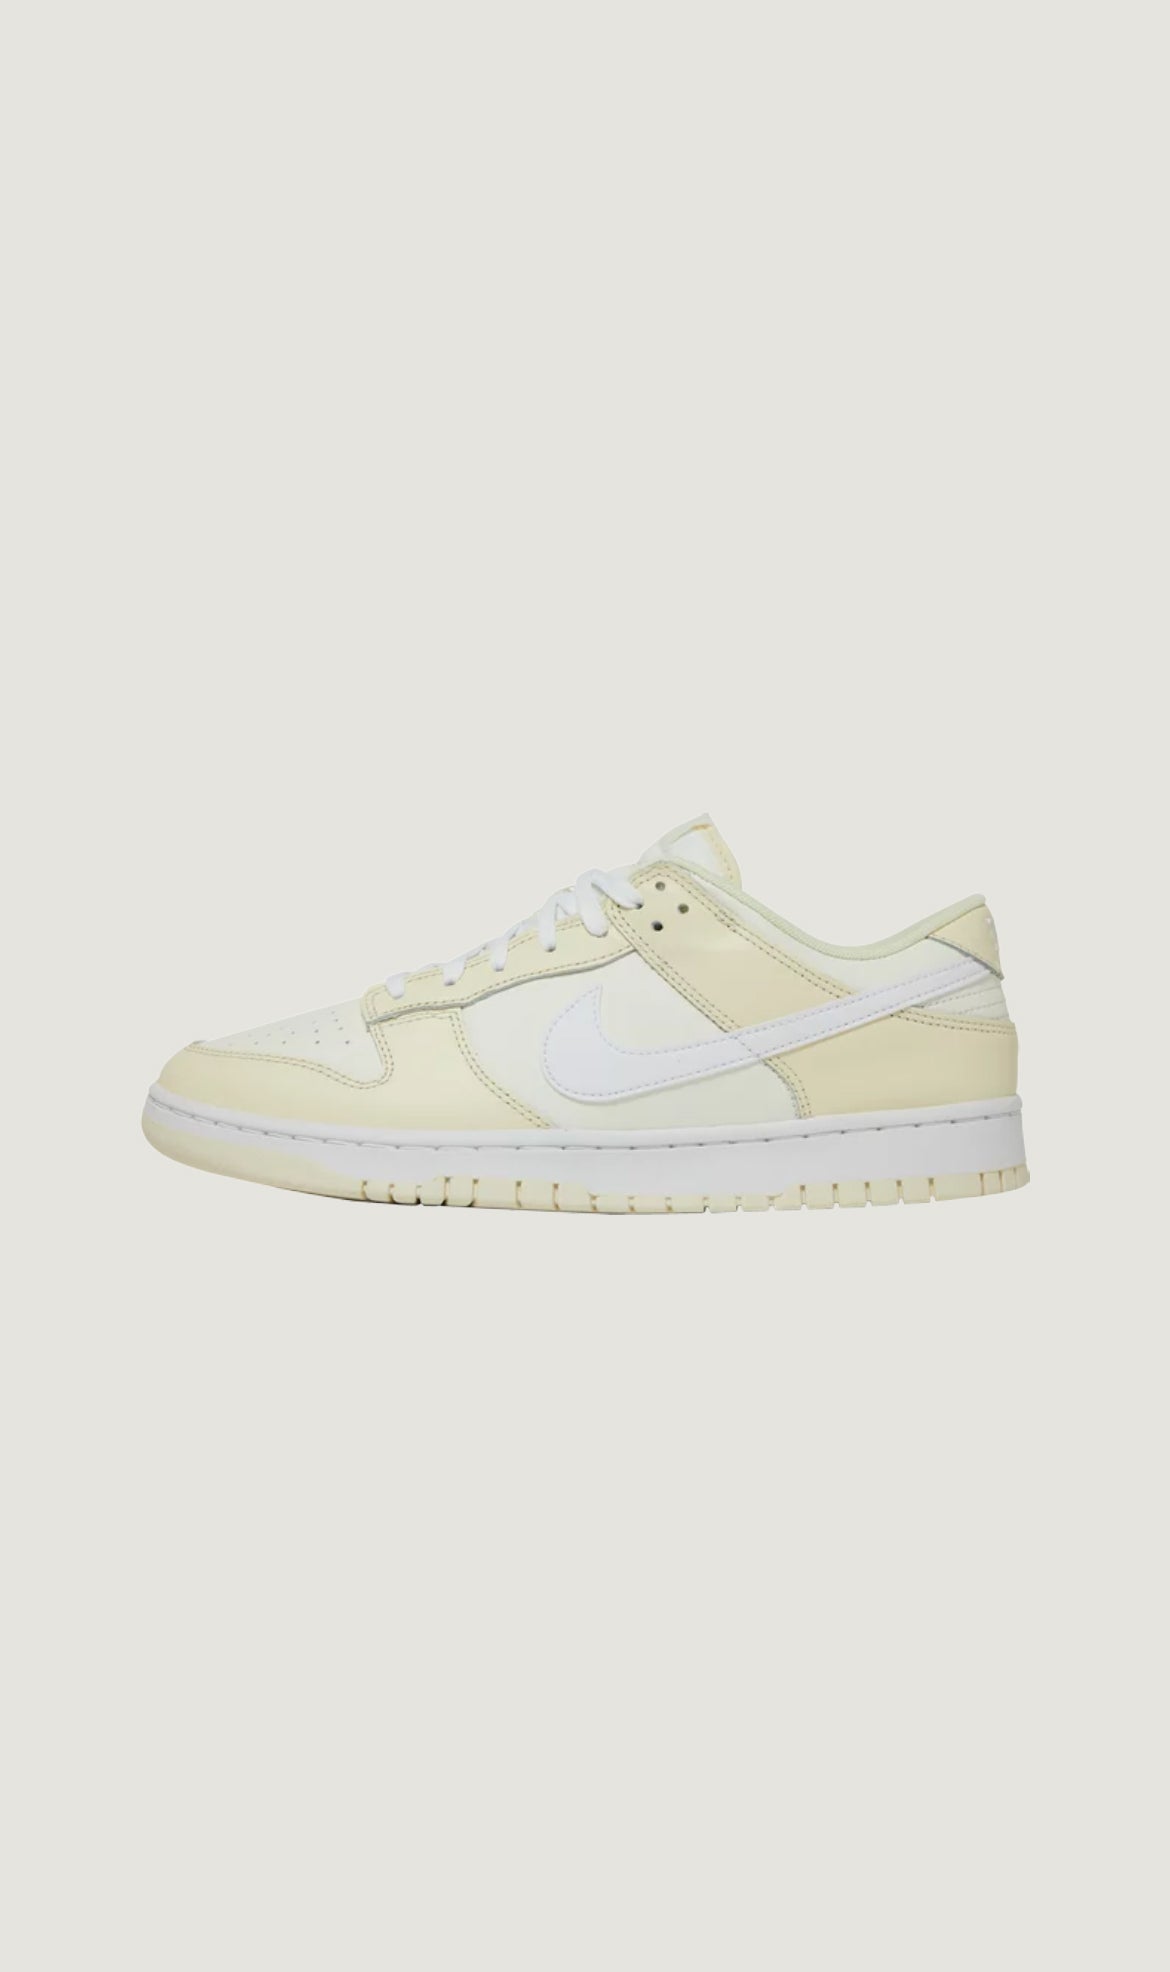 Load image into Gallery viewer, WMNS DUNK LOW RETRO - COCONUT MILK
